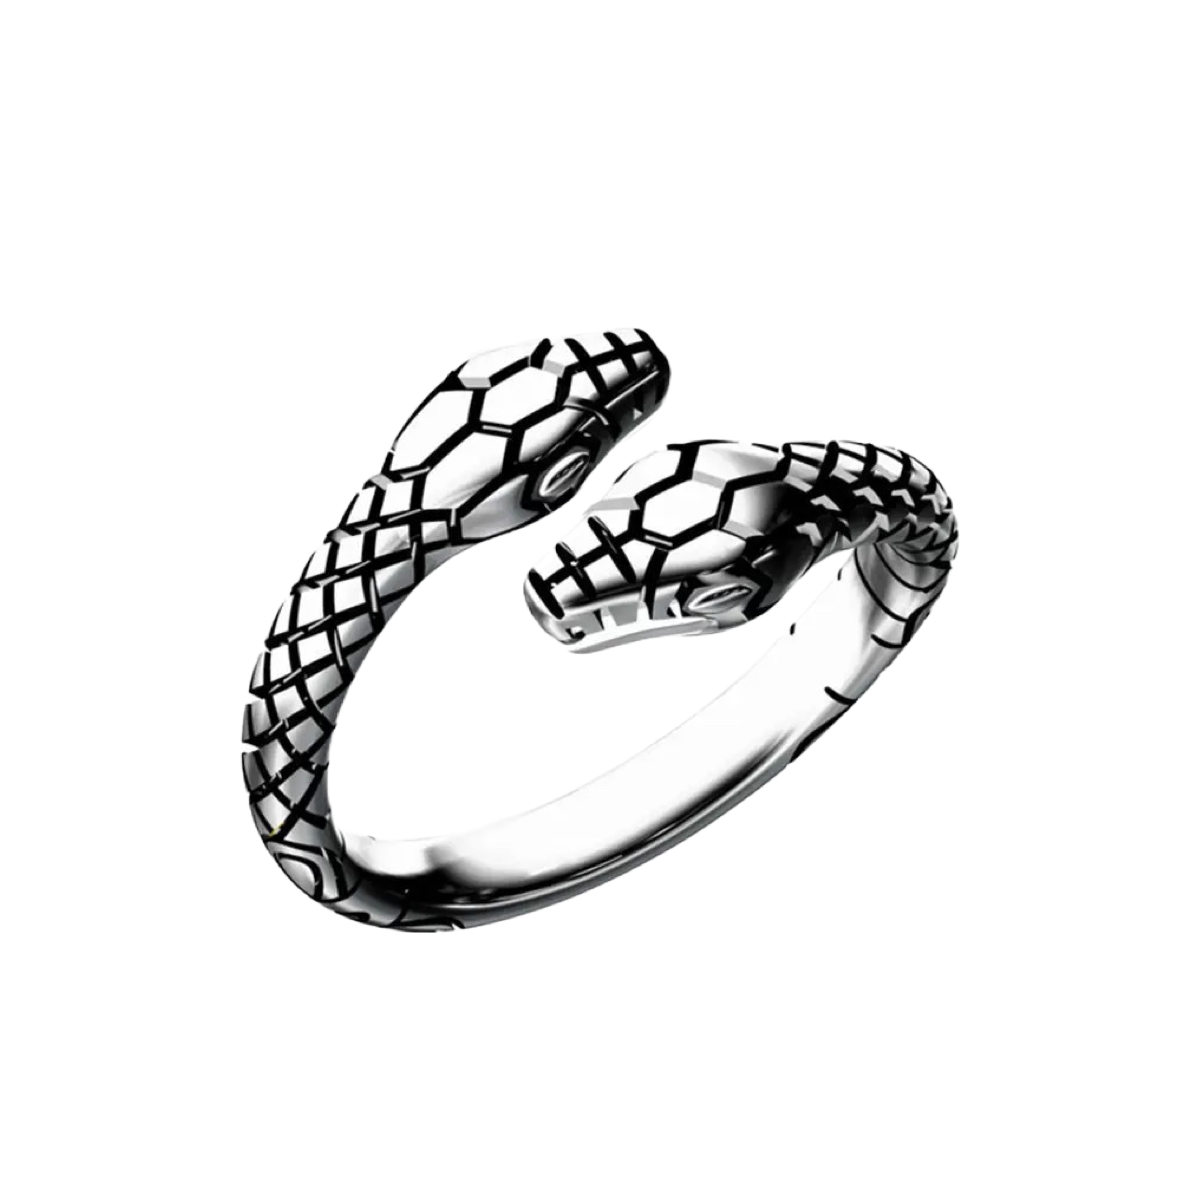 A Double Snake Head Ring from Rebel Saint Co on a white background.